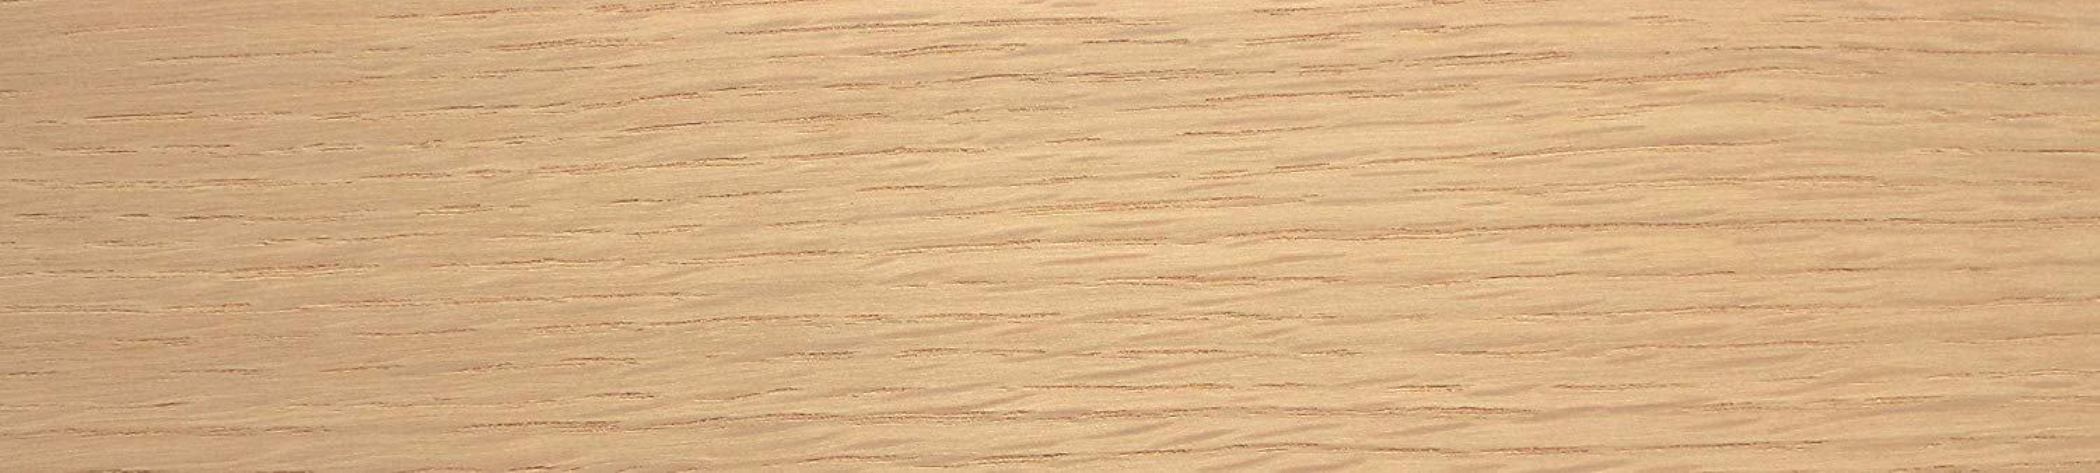 AMERICAN WHITE OAK Pre-glued Iron On Real Wood Edging 30mm Wide